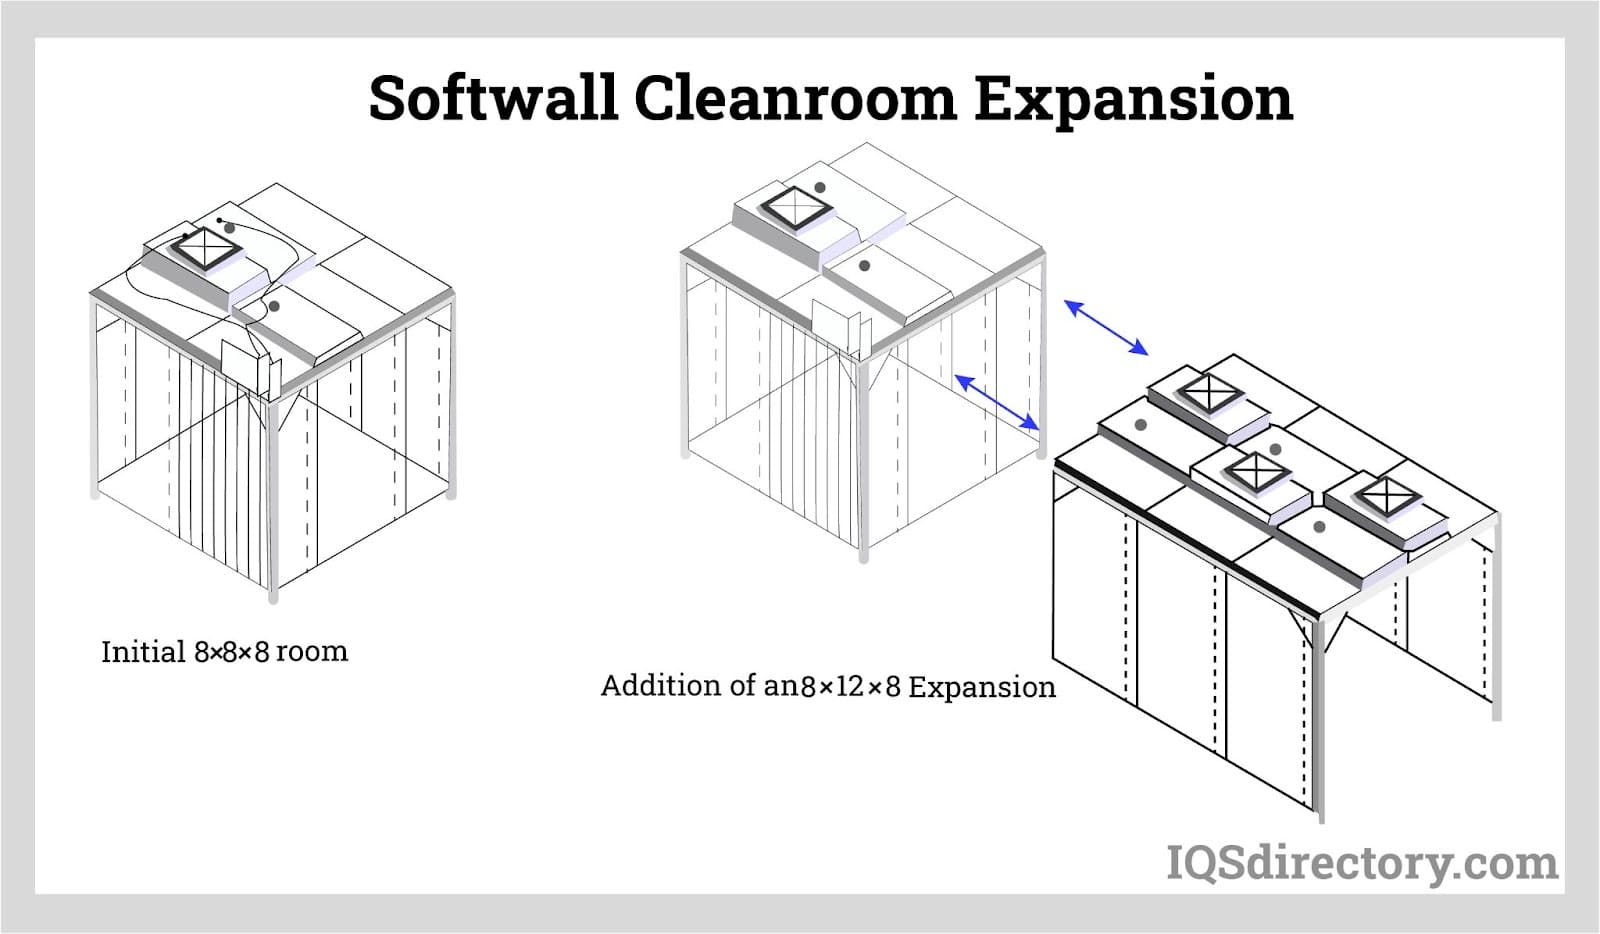 Softwall Cleanroom Expansion